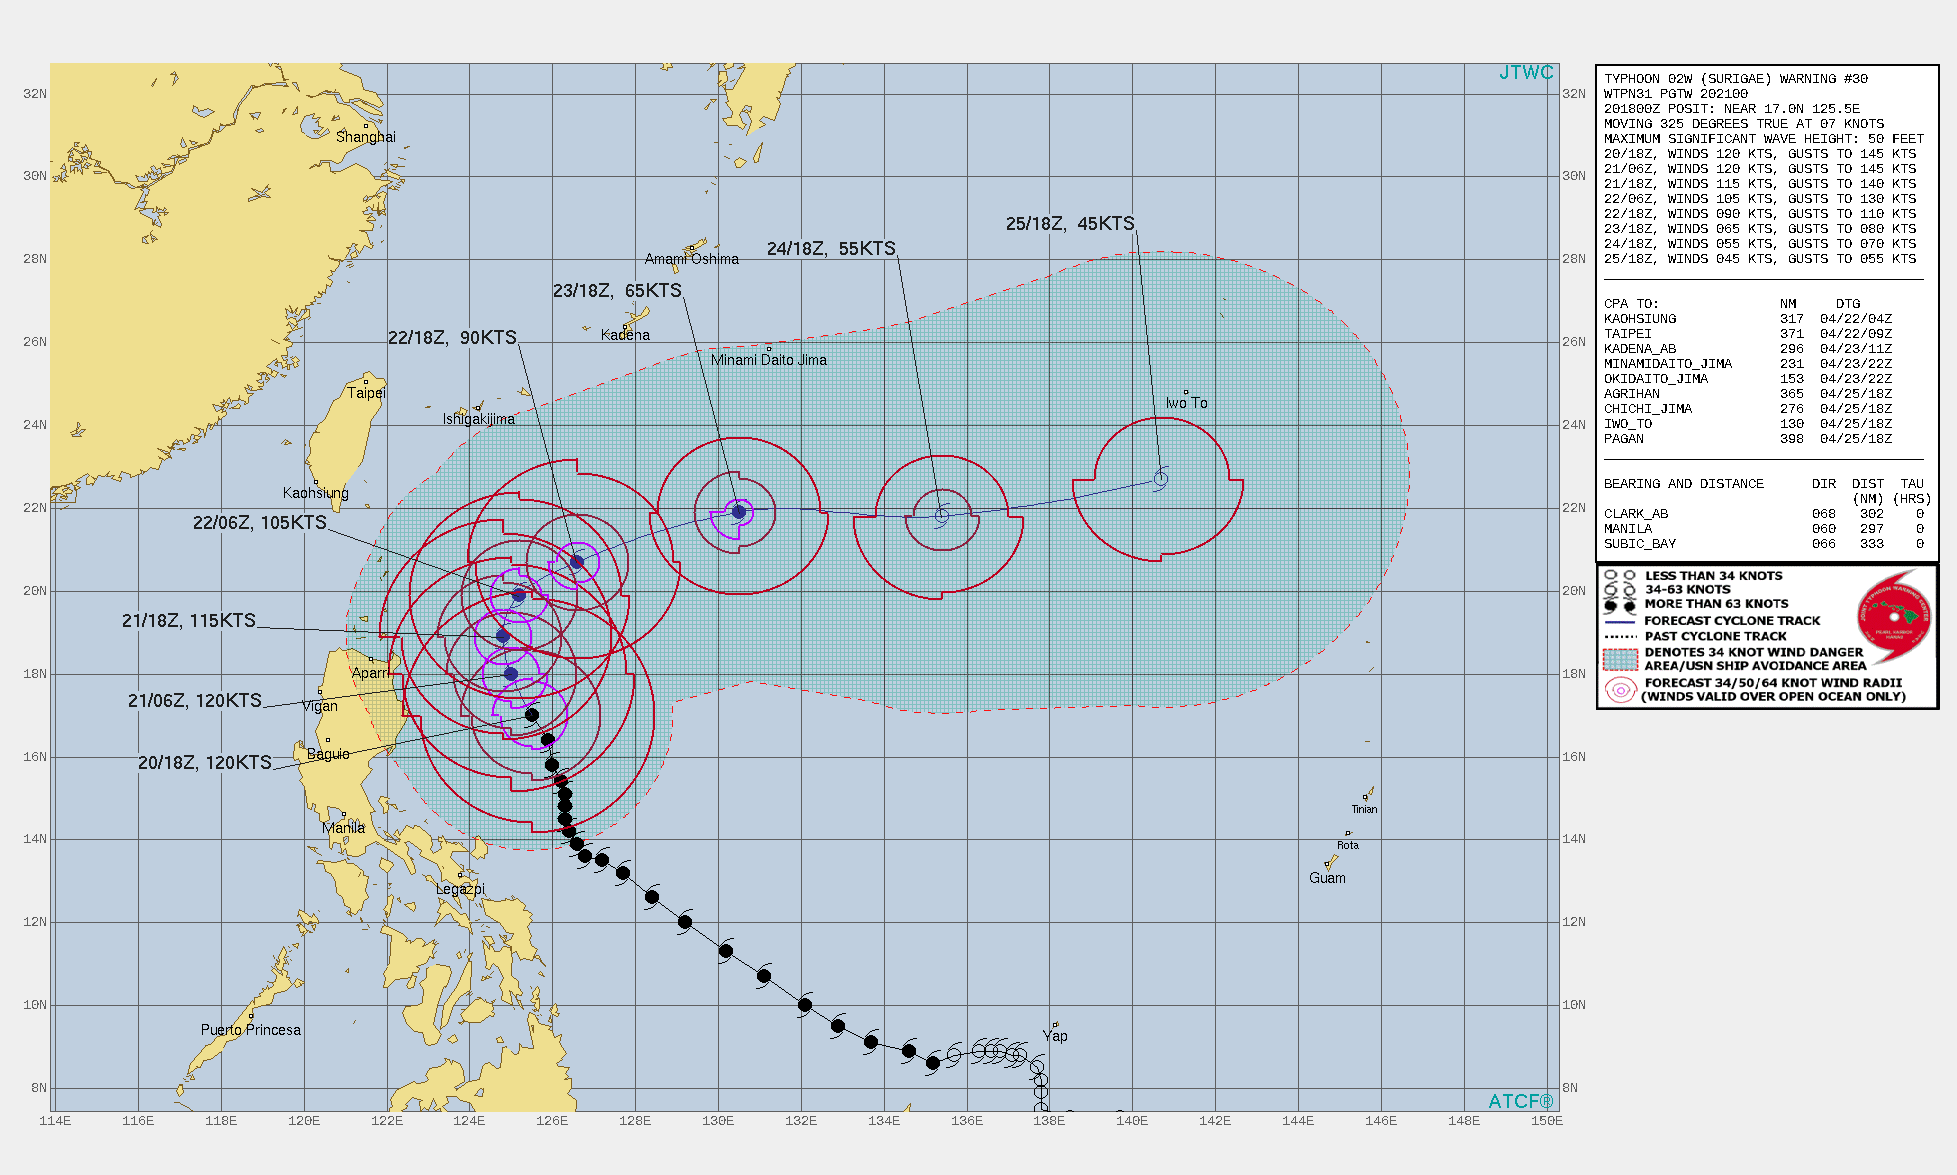 02W(SURIGAE). WARNING 31 ISSUED AT 21/03UTC.THROUGH 24 HOURS, SURIGAE WILL CONTINUE TRACKING NORTH- NORTHWESTWARD TO THE EAST OF LUZON ALONG THE WESTERN PERIPHERY OF AN  UPPER-LEVEL RIDGE TO THE EAST. THE LARGE AND STABLE CORE SIZE FAVORS  LITTLE INTENSITY CHANGE UNTIL THE ATMOSPHERIC ENVIRONMENT BECOMES  MORE HOSTILE. THIS IS EXPECTED TO OCCUR AFTER 24 HOURS AS A  SHORTWAVE TROUGH WITHIN THE SUBTROPICAL JET (STJ) APPROACHES FROM  SOUTHEASTERN CHINA, DRAMATICALLY INCREASING VERTICAL WIND SHEAR TO  AROUND 30 KNOTS. STEADY WEAKENING IS EXPECTED TO ENSUE AFTER 24 HOURS  AS THE TYPHOON ACCELERATES NORTHEASTWARD AND THEN EASTWARD INTO THE  MID-LATITUDE WESTERLIES. BY AROUND 72 HOURS, THE AFOREMENTIONED  SHORTWAVE IS EXPECTED TO INTERACT DIRECTLY WITH SURIGAE. MODEL  SOLUTIONS DIVERGE AT THIS POINT, WITH VARYING DEGREES OF SYMBIOTIC  INTERACTION BETWEEN THE SHORTWAVE AND THE TYPHOON, DEPENDING ON  THEIR POSITIONS RELATIVE TO EACH OTHER. THE MORE FAVORABLE THE  INTERACTION, THE FASTER AND STRONGER SURIGAE IS LIKELY TO BE. THE  CURRENT FORECAST HEDGES BETWEEN THESE OUTCOMES, AS UNCERTAINTY  INCREASES SUBSTANTIALLY IN TRACK AND INTENSITY BEGINNING AROUND 72  HOURS. THE CURRENT FORECAST SHOWS WEAKENING TO 65 KNOTS/CAT 1 AT 72 HOURS.  THE TRACK FORECAST IS SIMILAR TO THE PREVIOUS ONE, WITH HIGH  CONFIDENCE THROUGH 48 HOURS AND MODERATE CONFIDENCE THROUGH 72 HOURS. AFTER 72 HOURS, SURIGAE WILL INTERACT WITH A LOW-LEVEL THERMAL  GRADIENT SOUTH OF JAPAN, AS WELL AS THE AFOREMENTIONED UPPER-LEVEL  SHORTWAVE TO ITS NORTHWEST. WHILE MODELS DEPICT A RANGE OF POSSIBLE  ARRANGEMENTS OF THESE FEATURES, THE INCREASINGLY BAROCLINIC  ENVIRONMENT AROUND THE CYCLONE IS EXPECTED TO INDUCE THE ONSET OF  EXTRATROPICAL TRANSITION (ET). THE FORECAST IS HIGHLY DEPENDENT ON  THE DETAILS OF ET, AND THUS BOTH MODEL TRACK AND INTENSITY SPREAD IS  HIGH AFTER 72 HOURS.